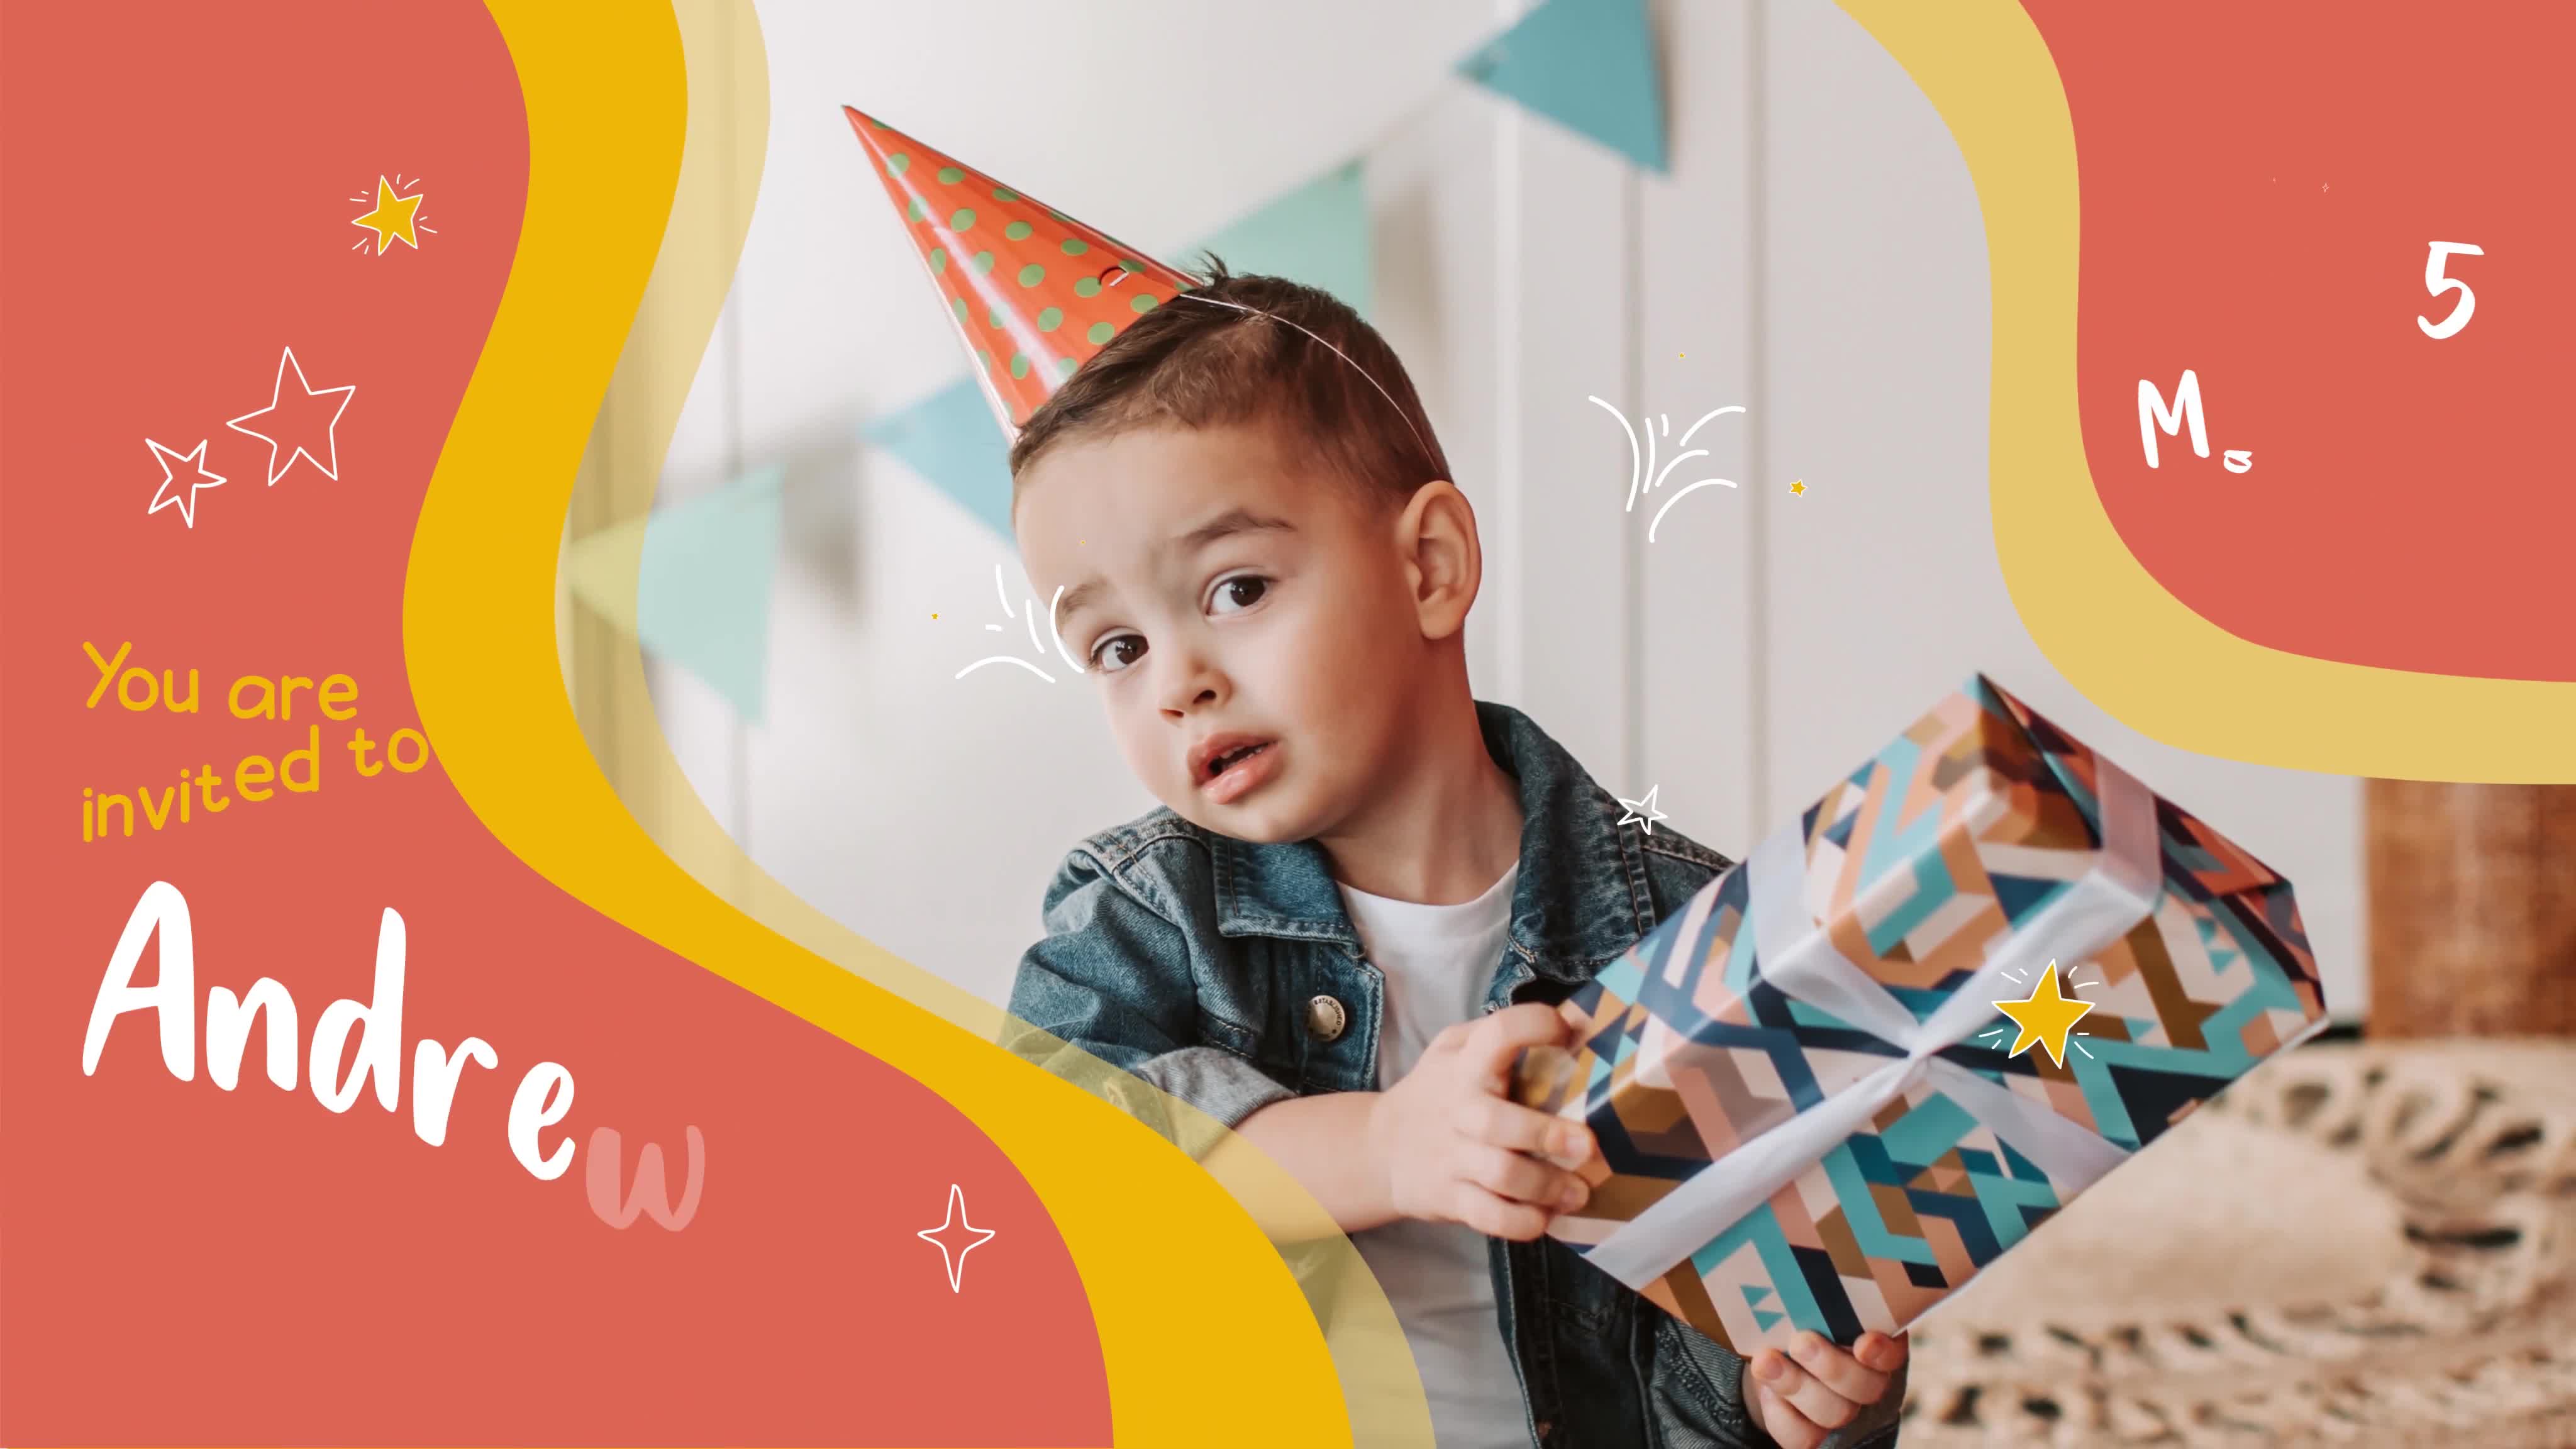 Kids Party Slideshow | After Effects